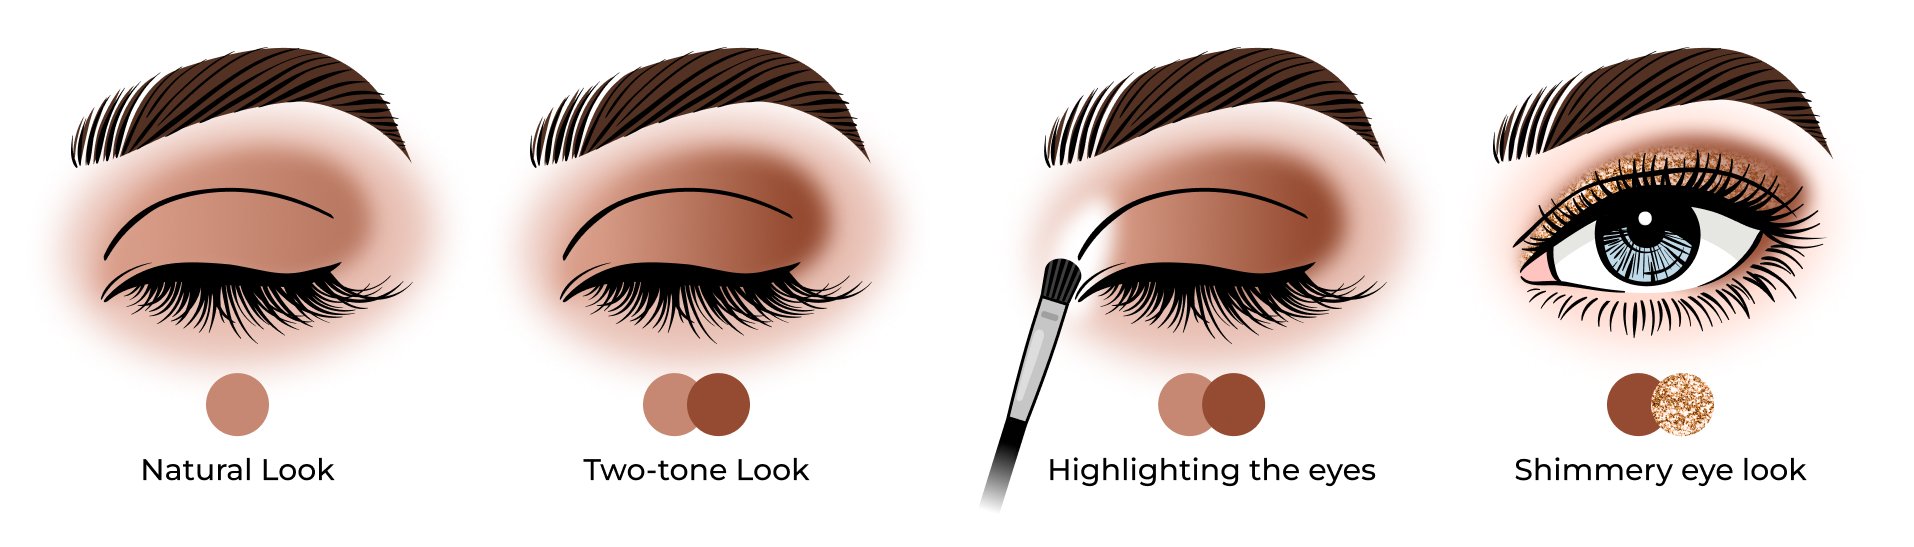 How To Apply Eyeshadow Like A Pro From